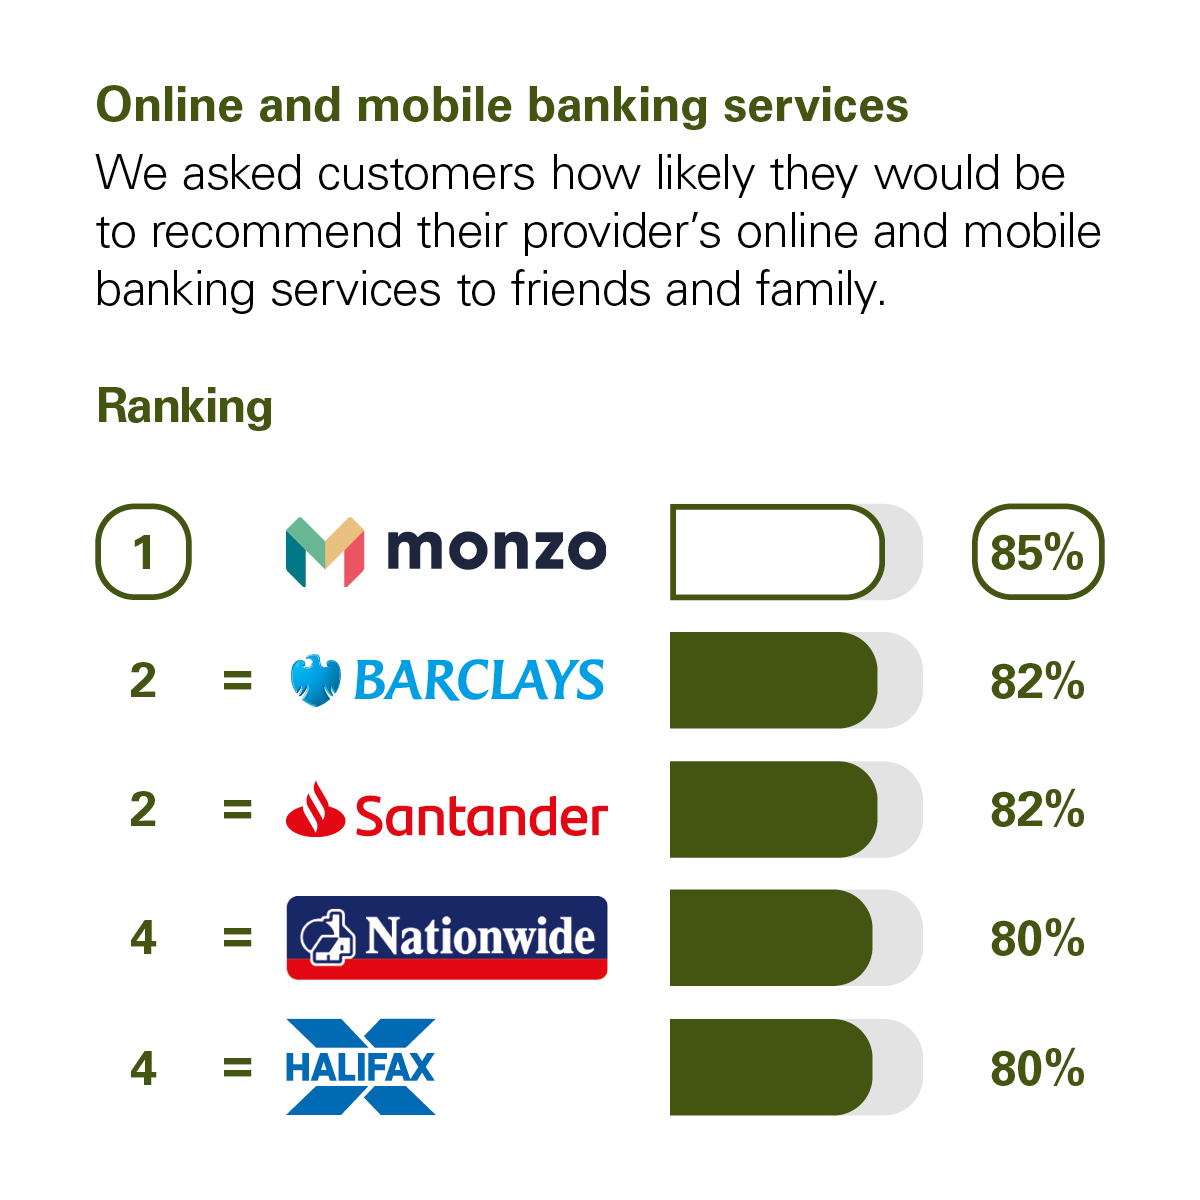 Graph showing the results of the CMA scoring of UK banks in the Online and Mobile Banking Services category. The CMA asked customers how likely they would be to recommend their provider's online and mobile banking services to friends and family. The rankings with percentage scores are: 1st Monzo, with 85%. Joint 2nd are Barclays and Santander with 82%. Joint 4th are Nationwide and Halifax with 80%.